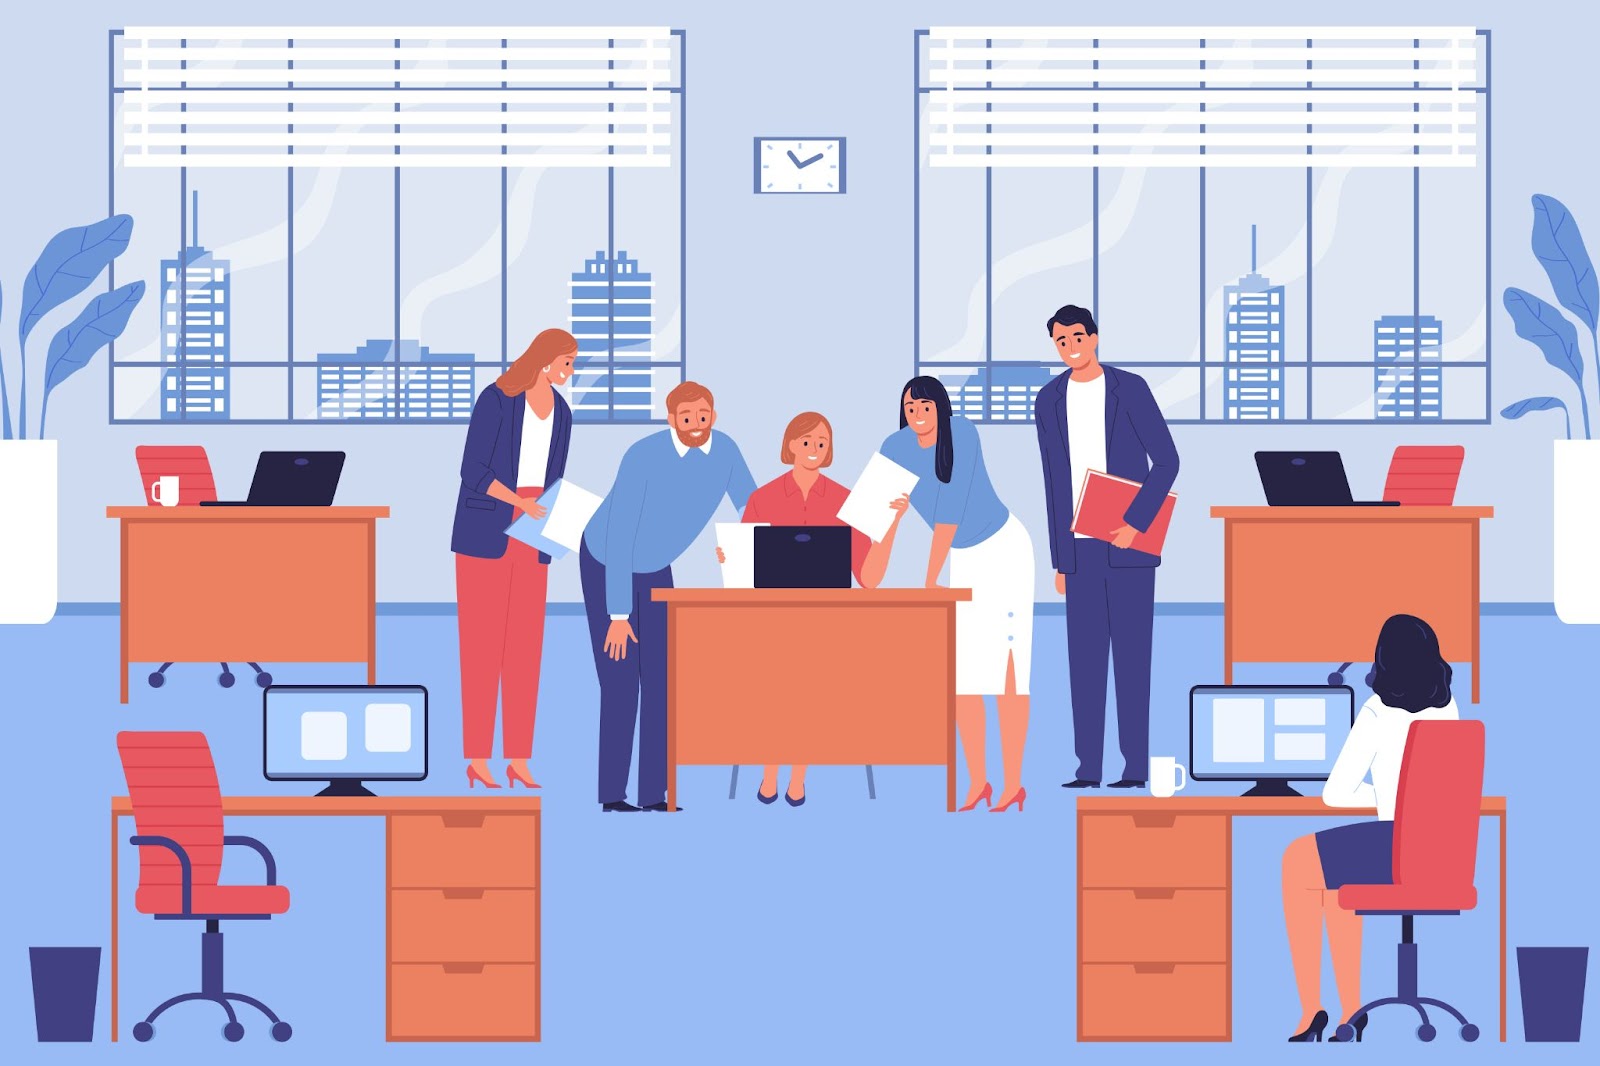 A flat design illustration of an office scene with several professionals gathered around a desk, collaborating on a project with computers and documents.